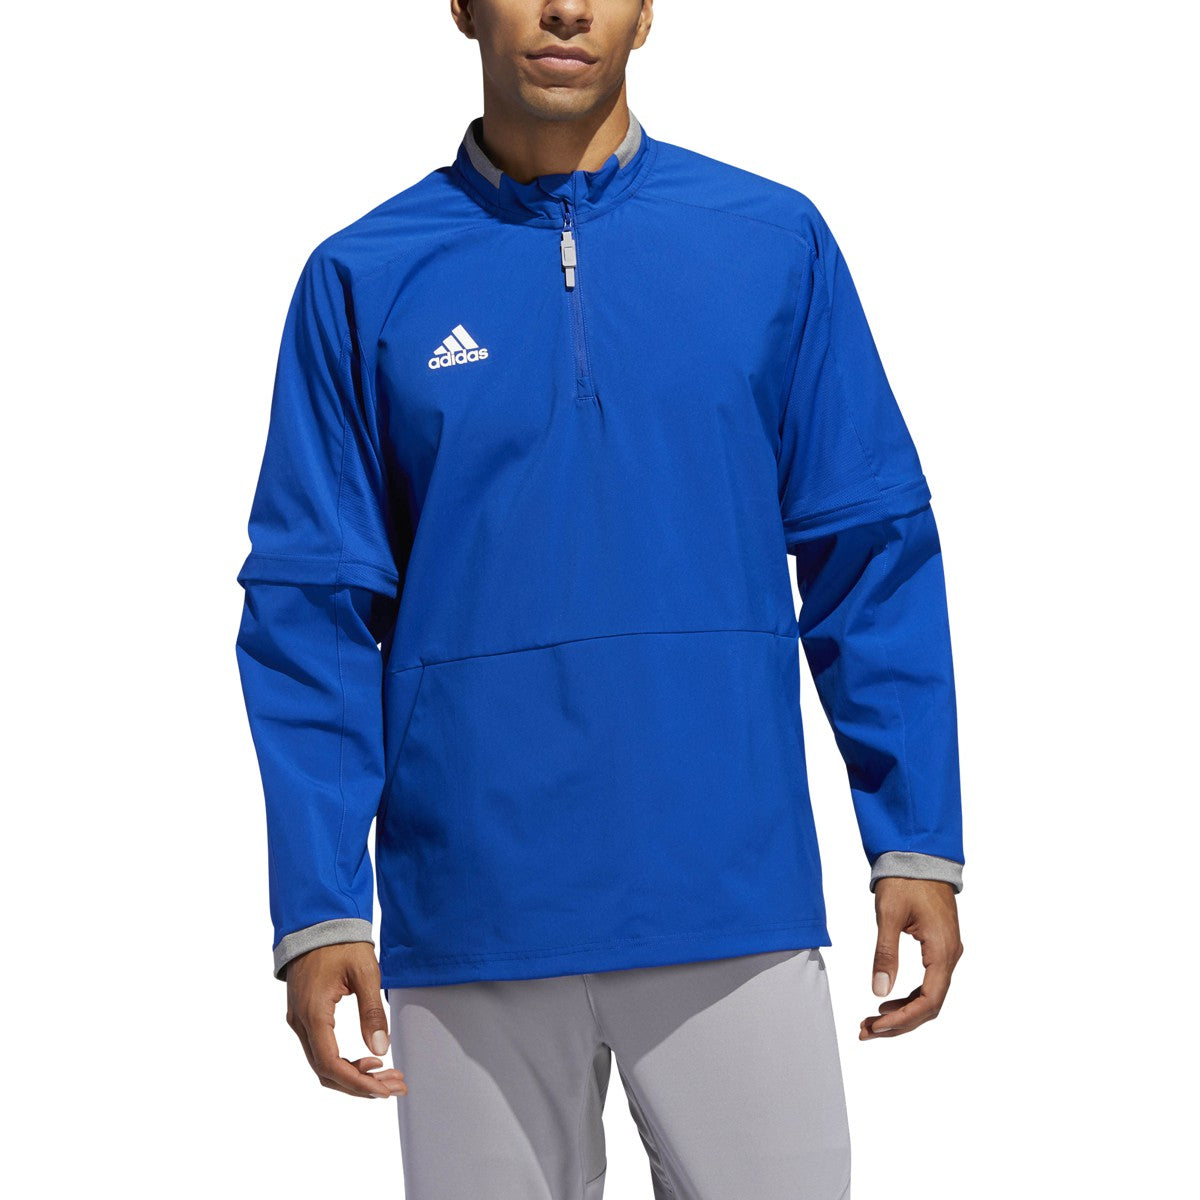 Rawlings Youth Launch Cage Jacket 18F